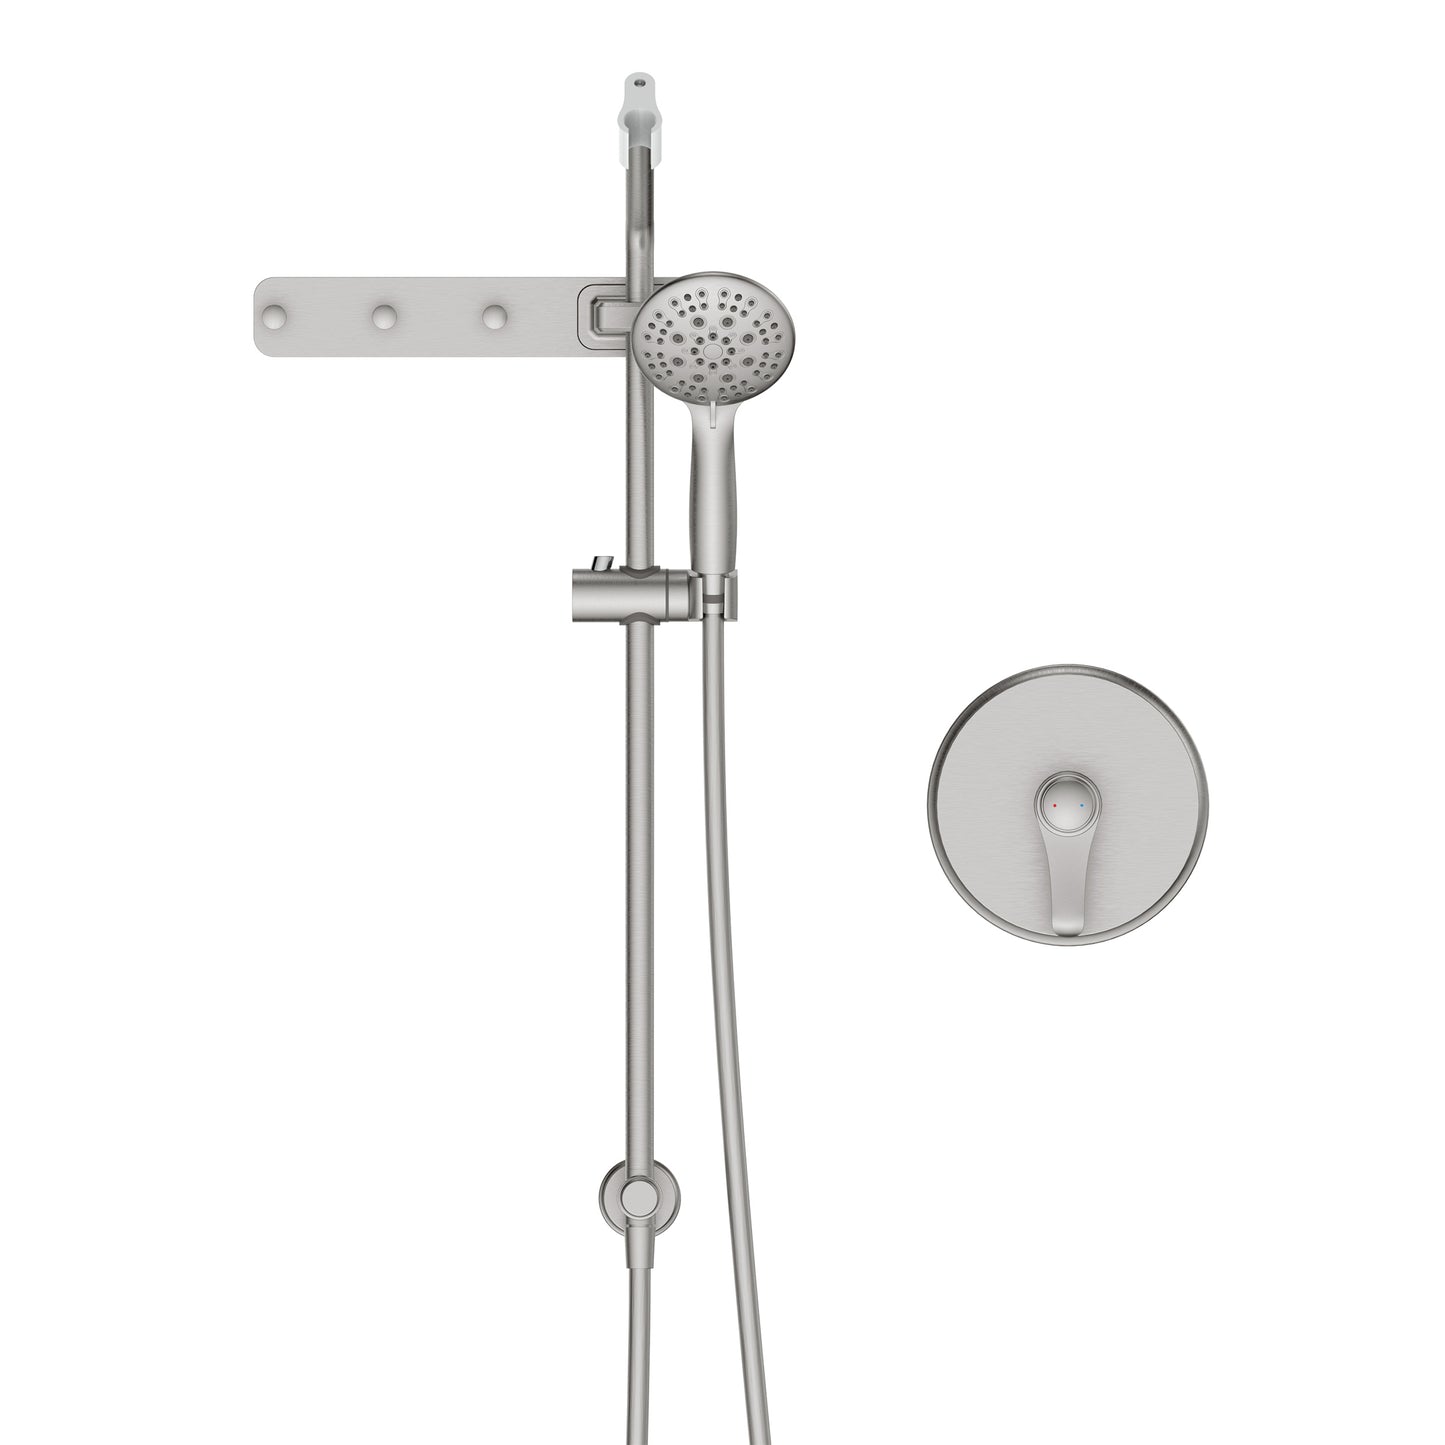 Large Amount of water Multi Function Shower Head - Shower System with 4." Rain Showerhead, 6-Function Hand Shower, Simple Style,With Storage Hook, Brushed Nickel